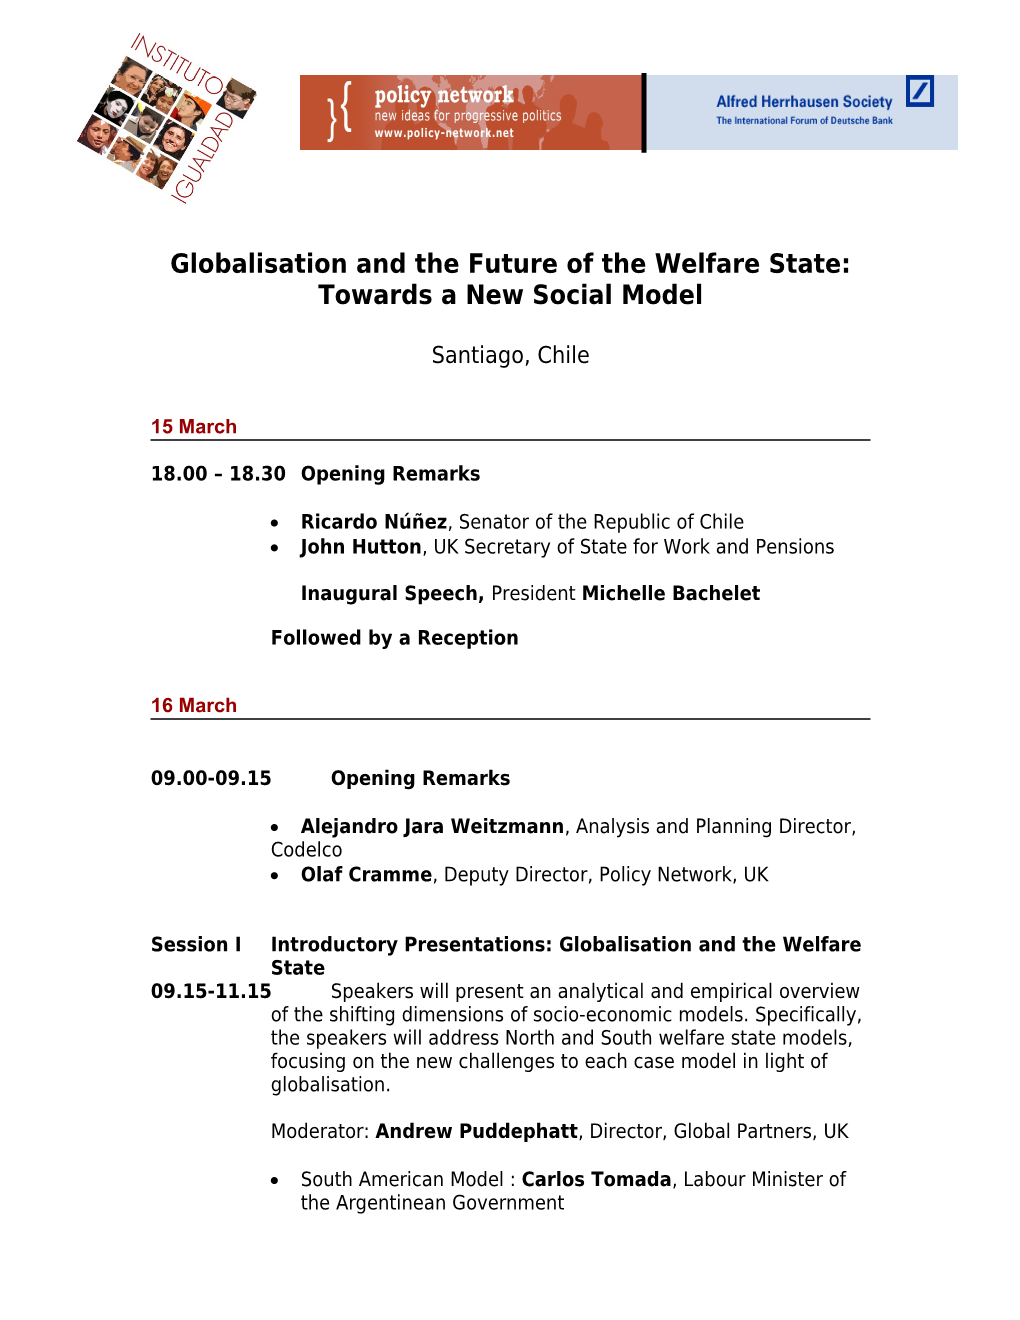 Globalisation and the Future of the Welfare State: Towards a New Social Model